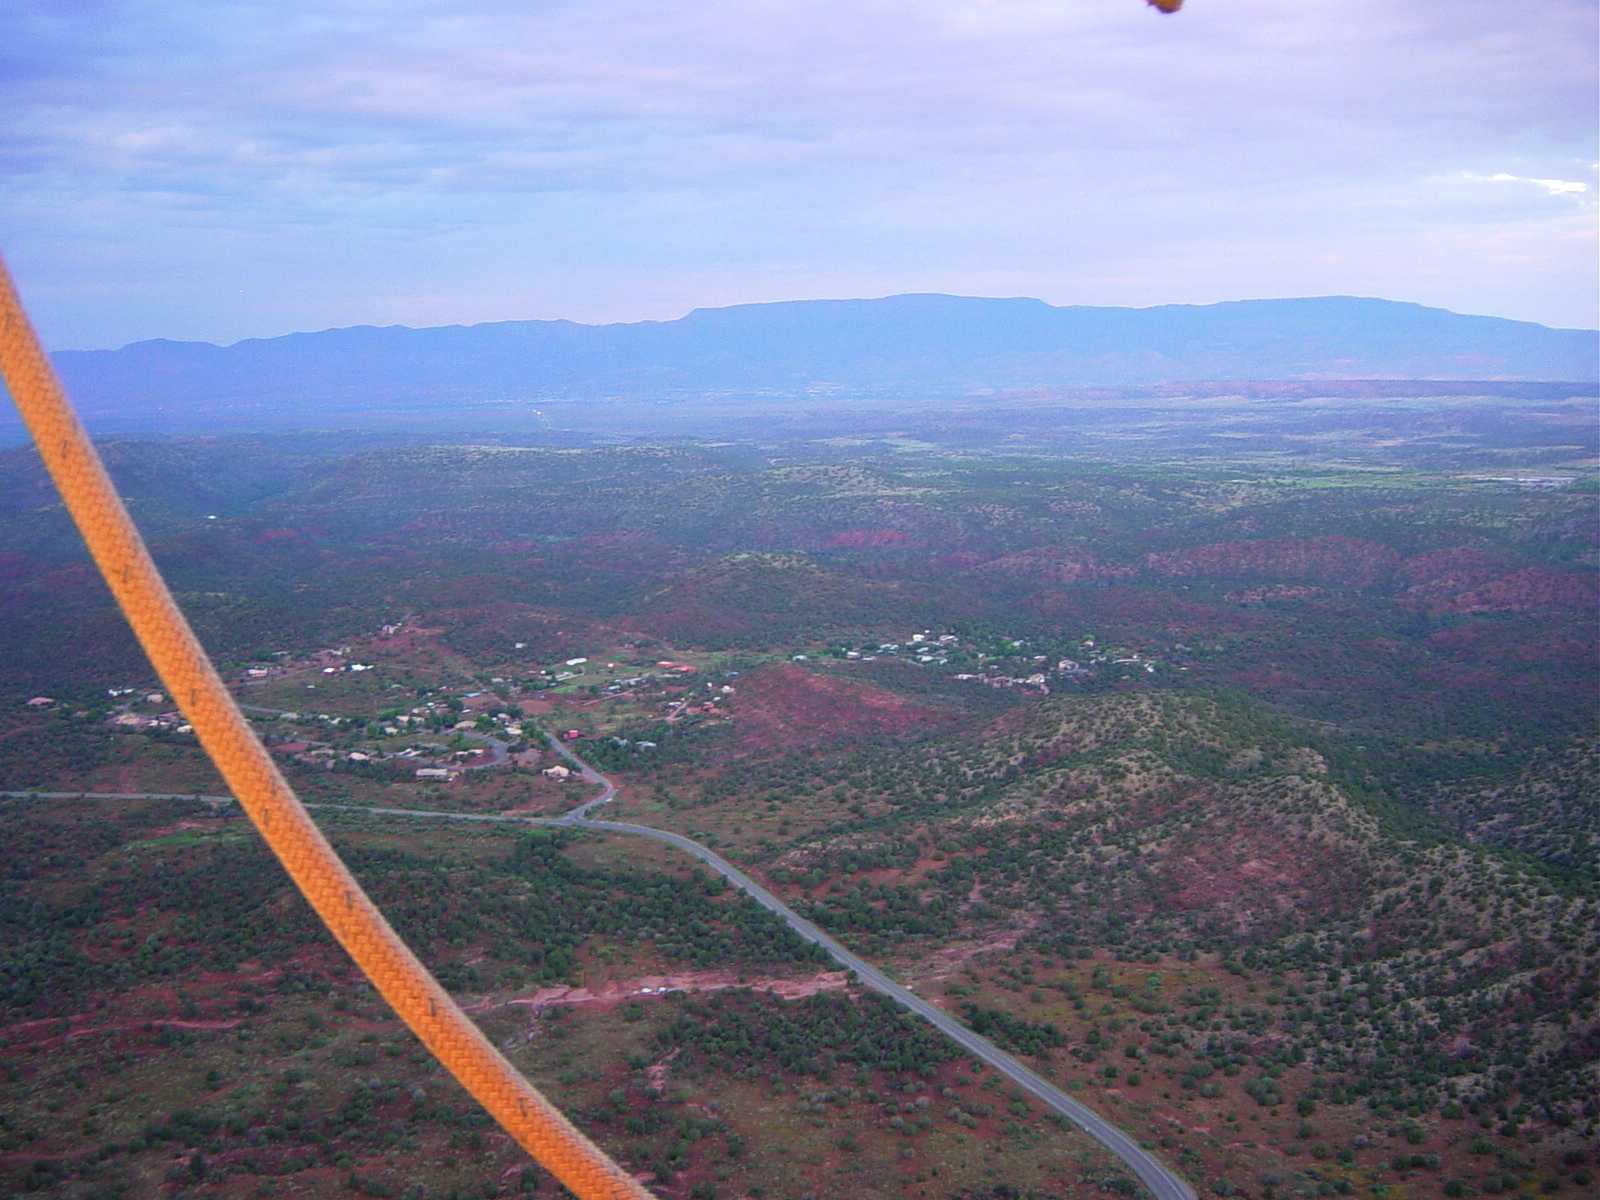 View from the balloon